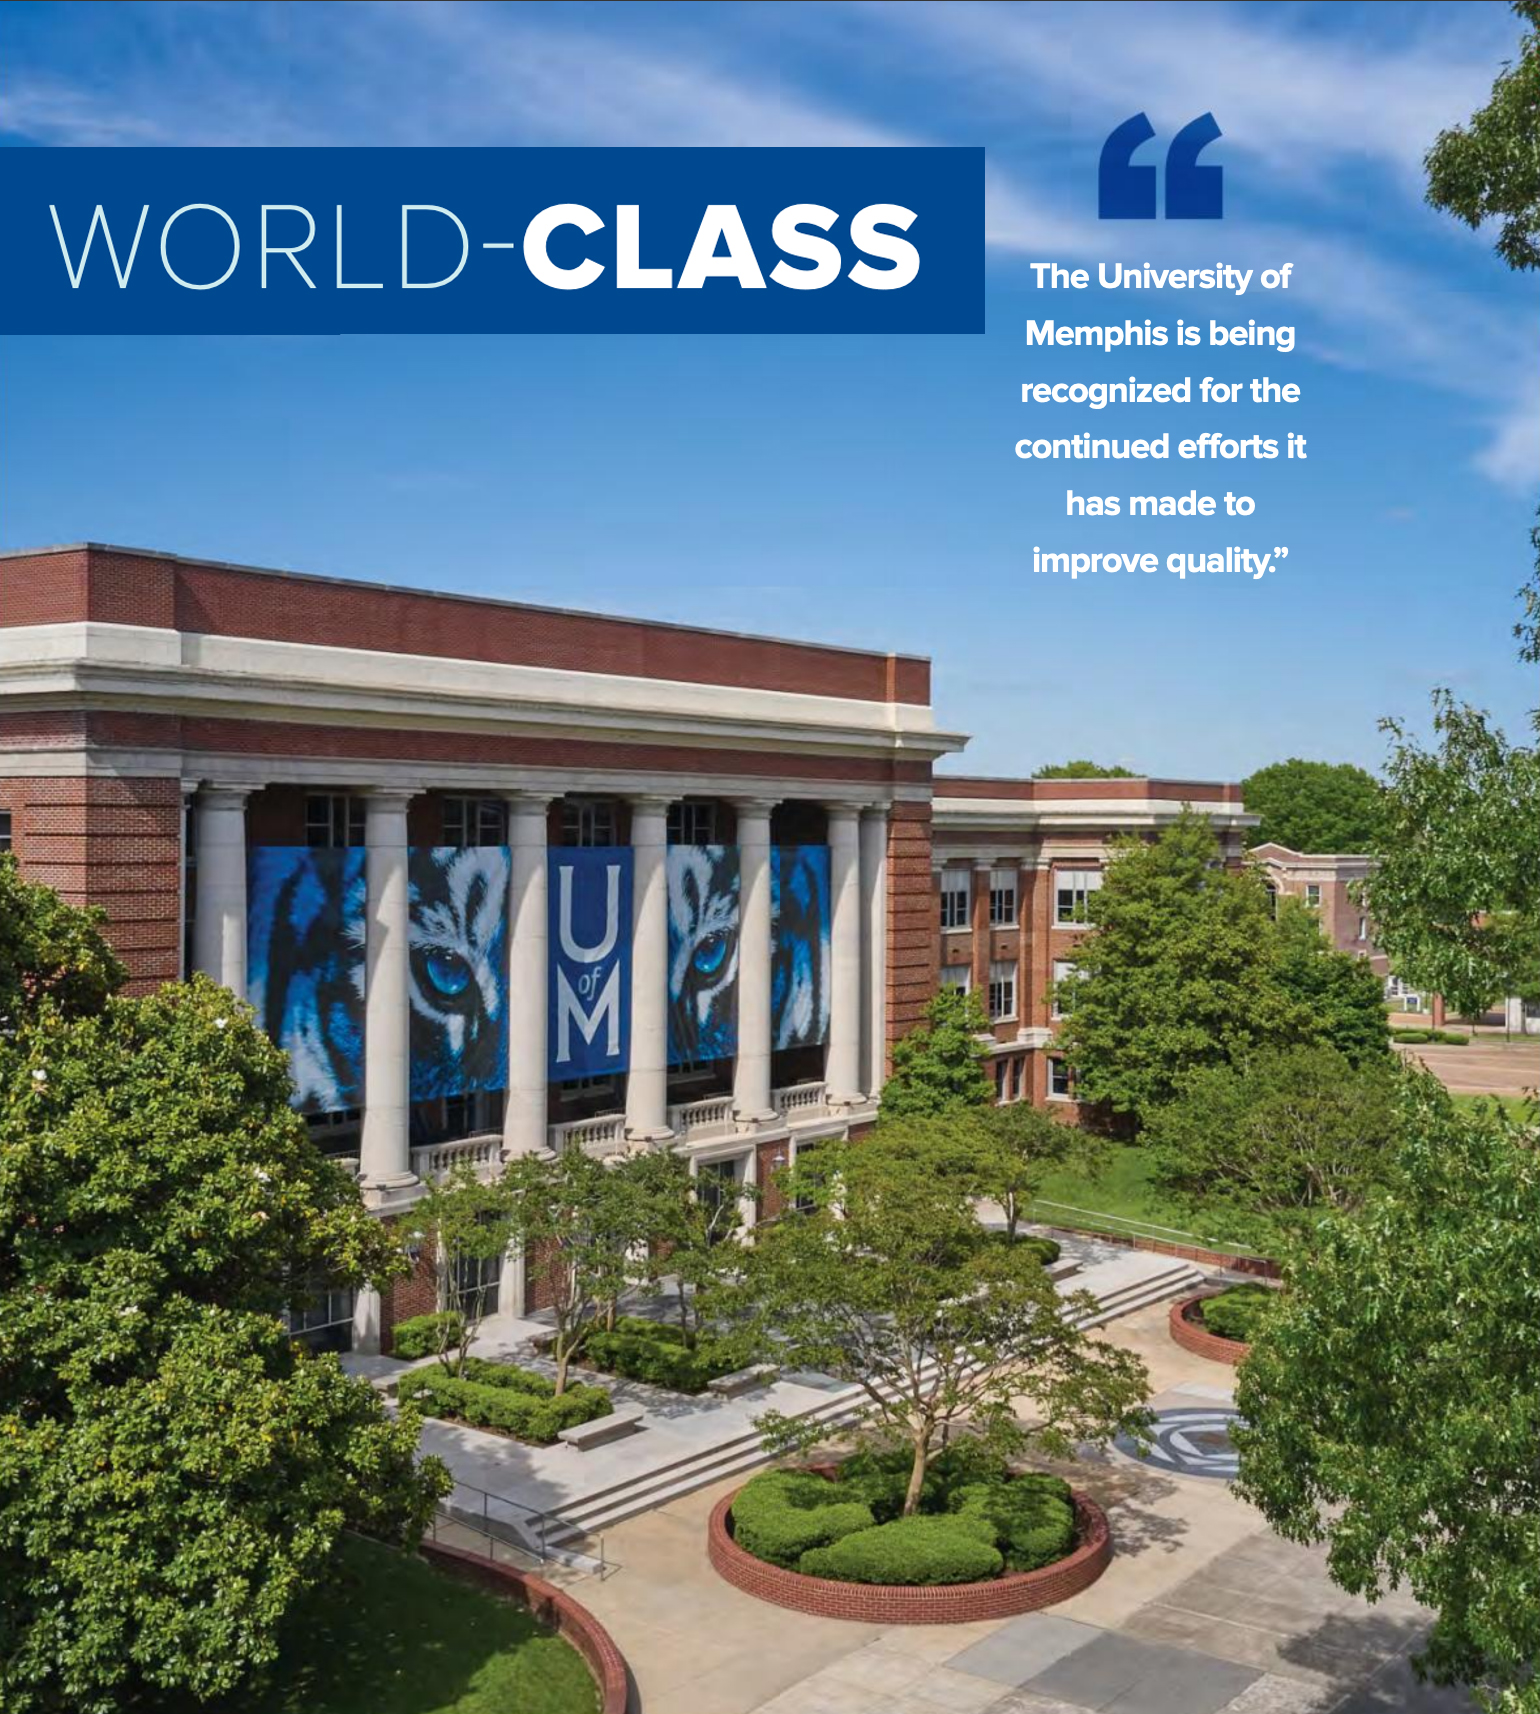 World-Class Institution | photo of Administration Building | "The University of Memphis is being recognized for the continued efforts it has made to improve quality.”